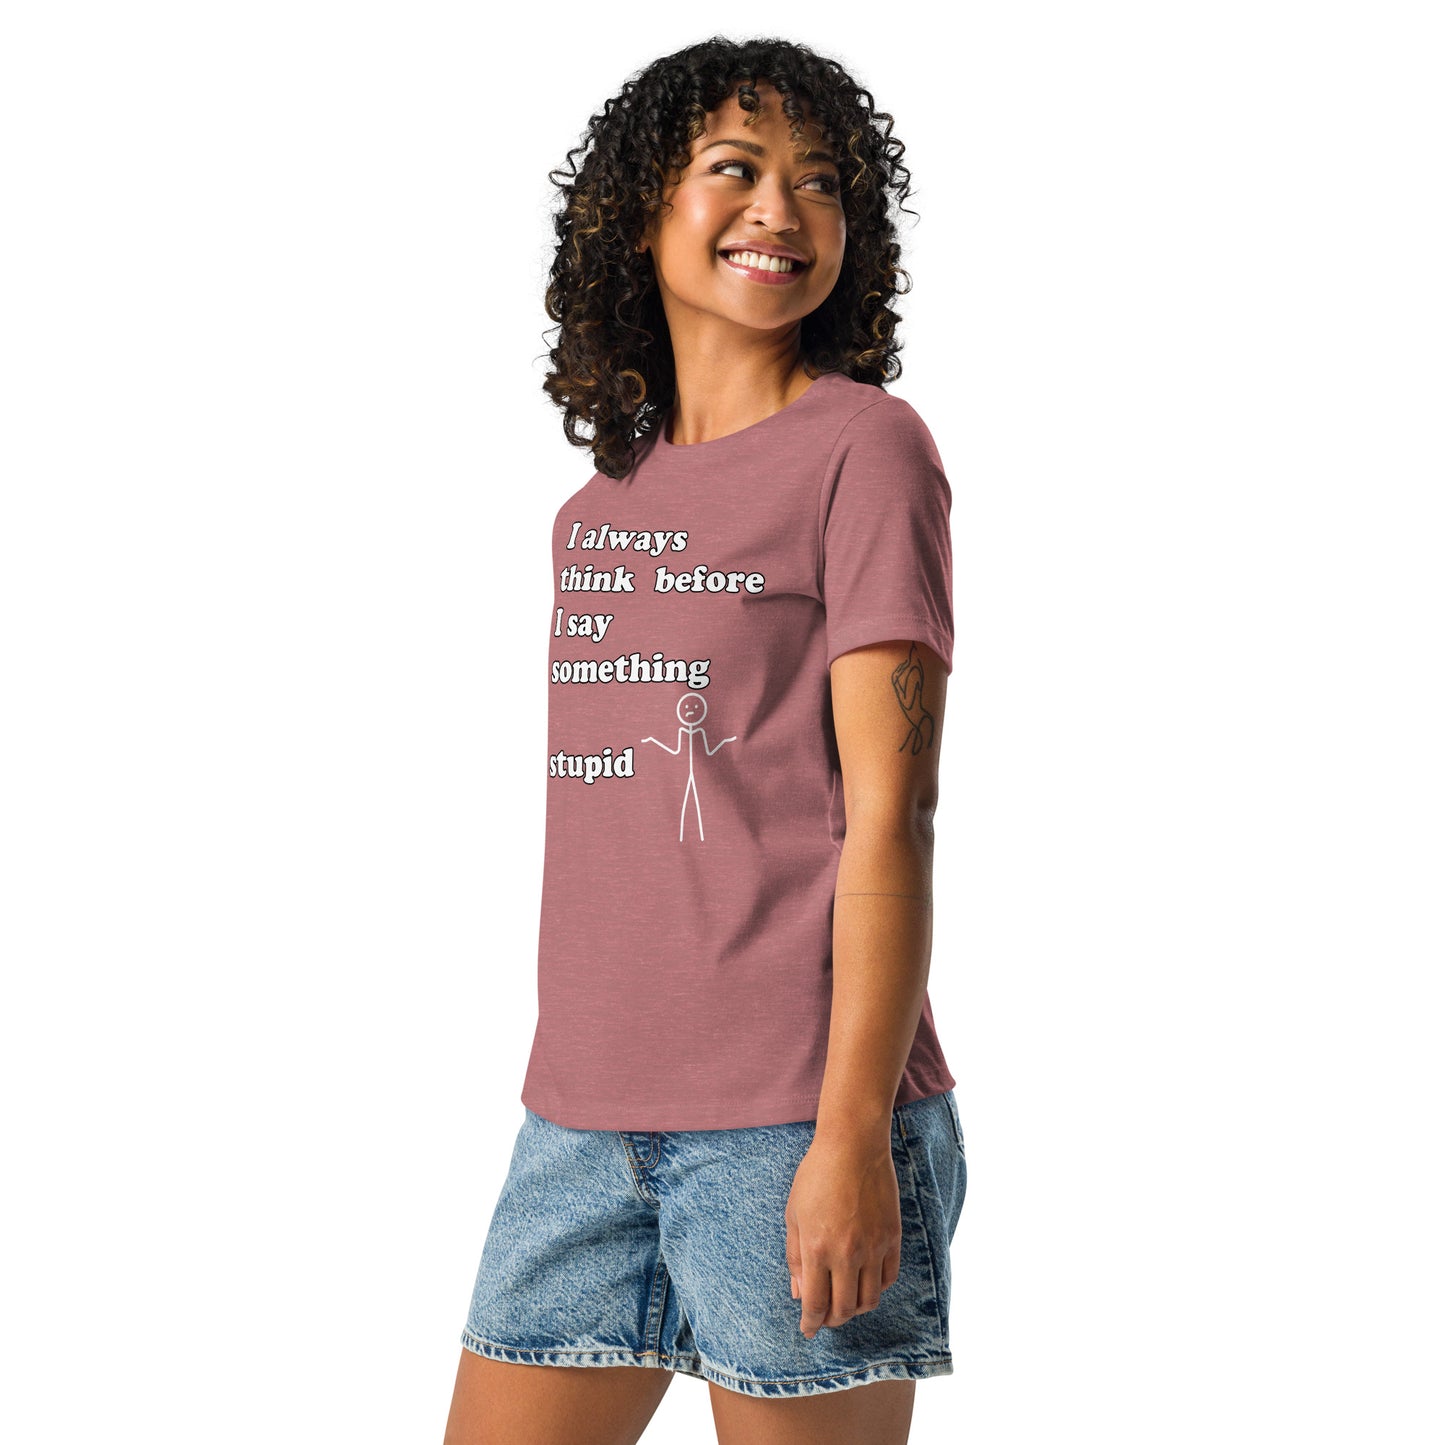 Woman with mauve t-shirt with text "I always think before I say something stupid"